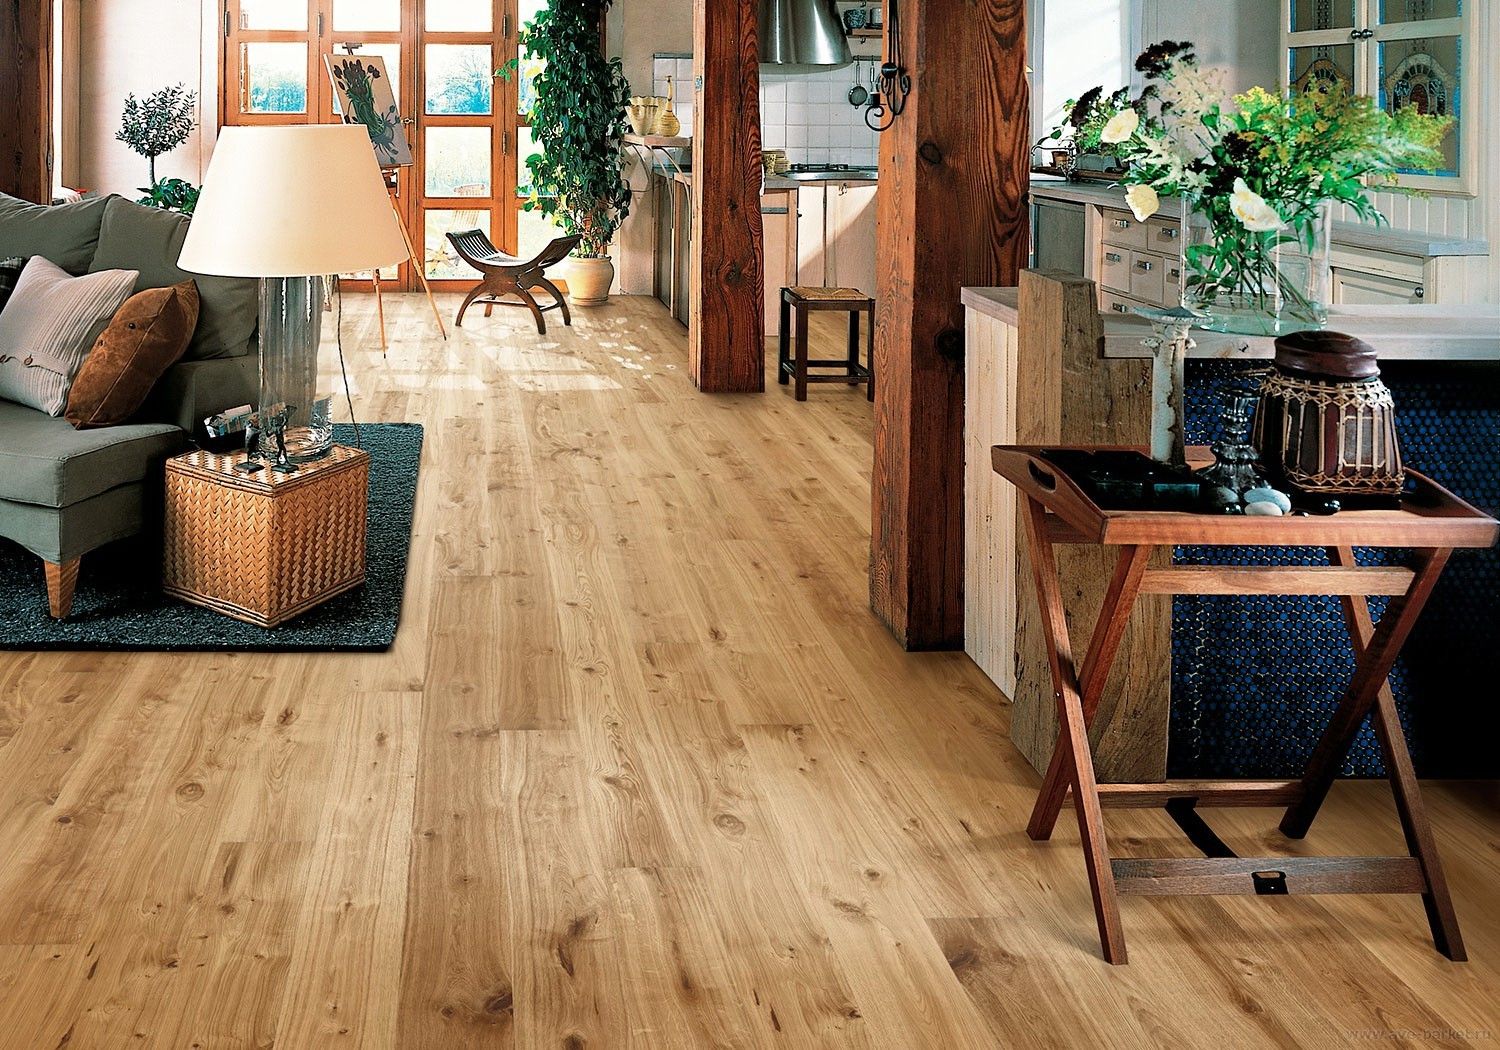 Kildare’s Craft: Artistry in Hardwood and Parquet Blends